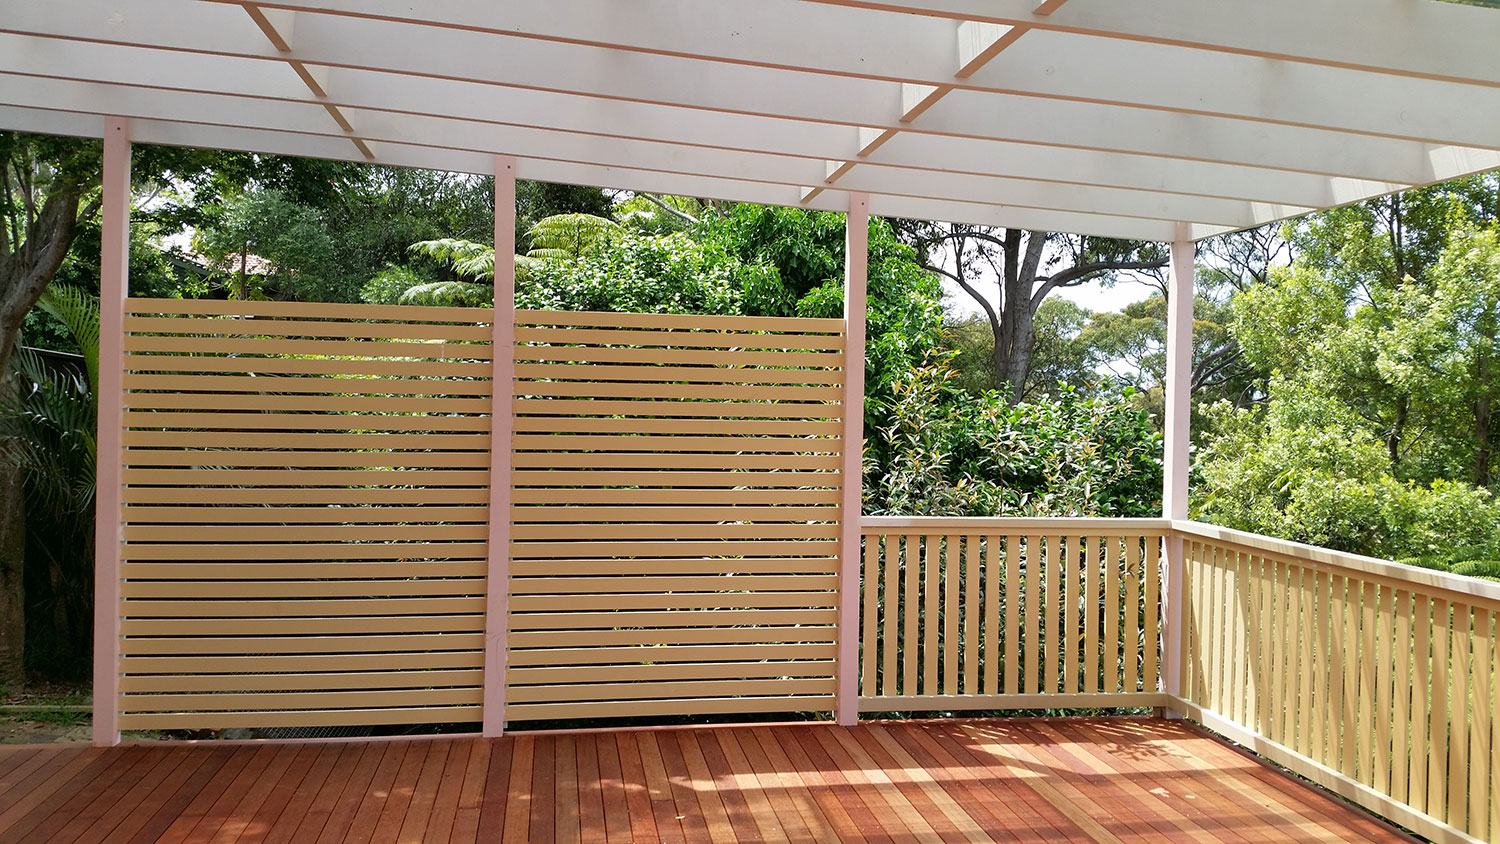 Pergola, privacy screen & deck at Frenchs Forest